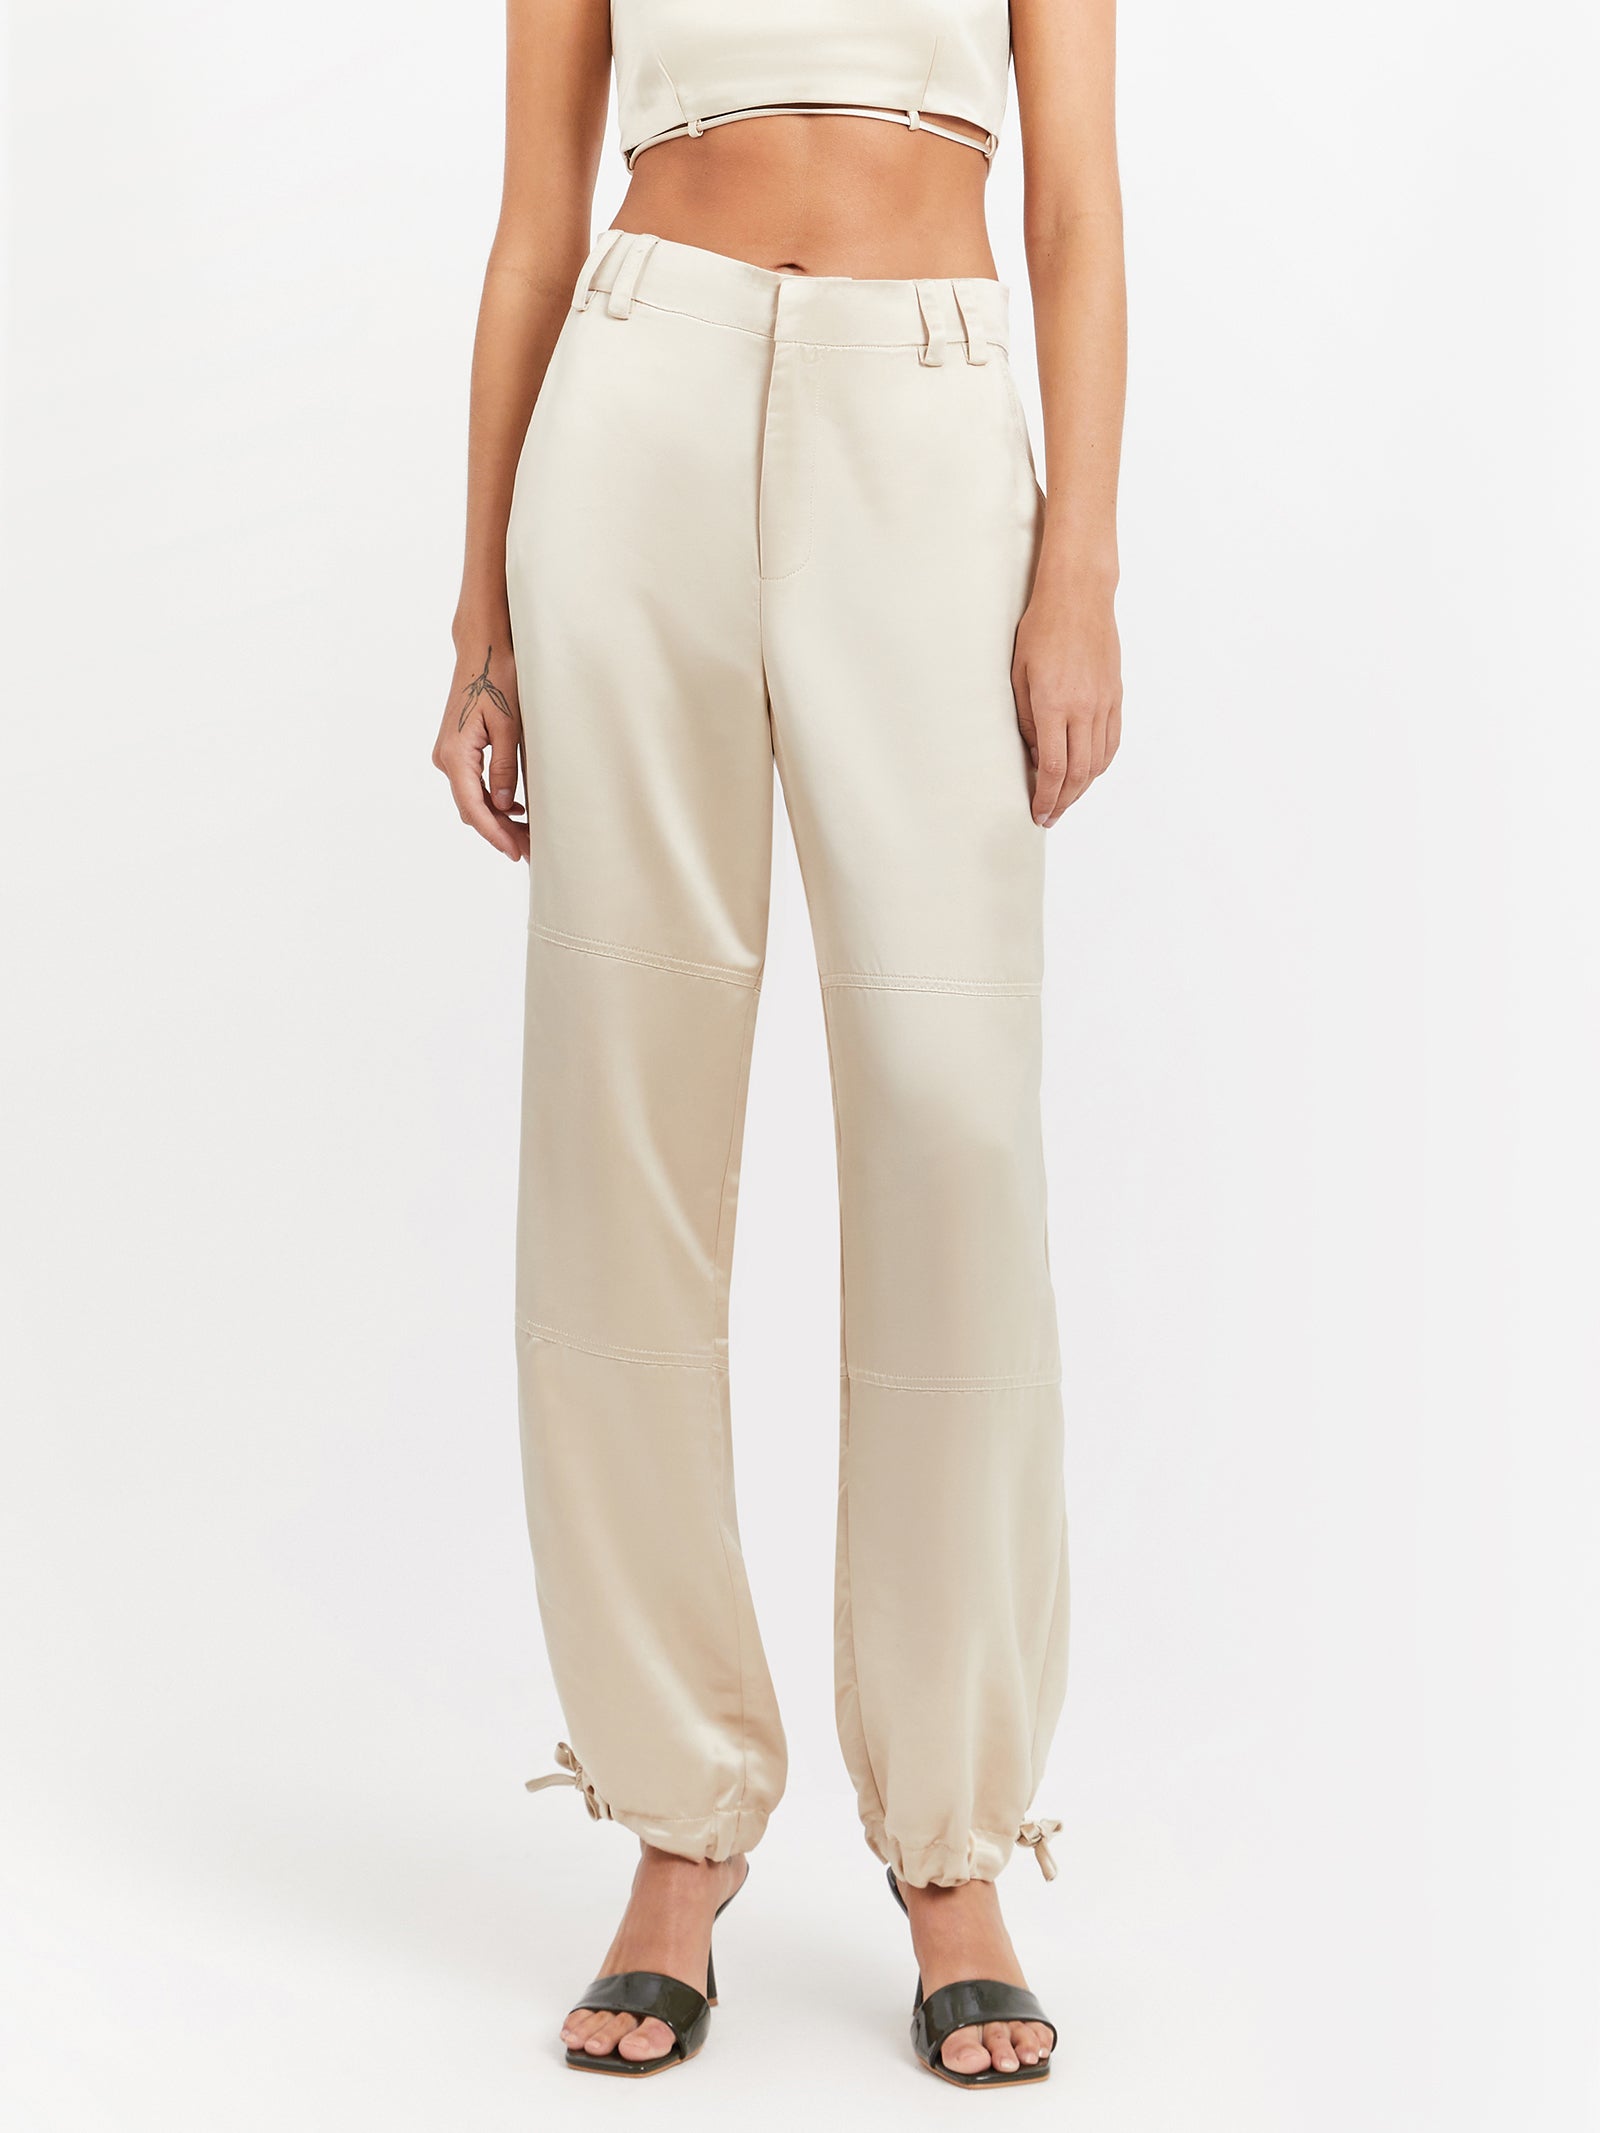 Aster Satin Pants in Ivory